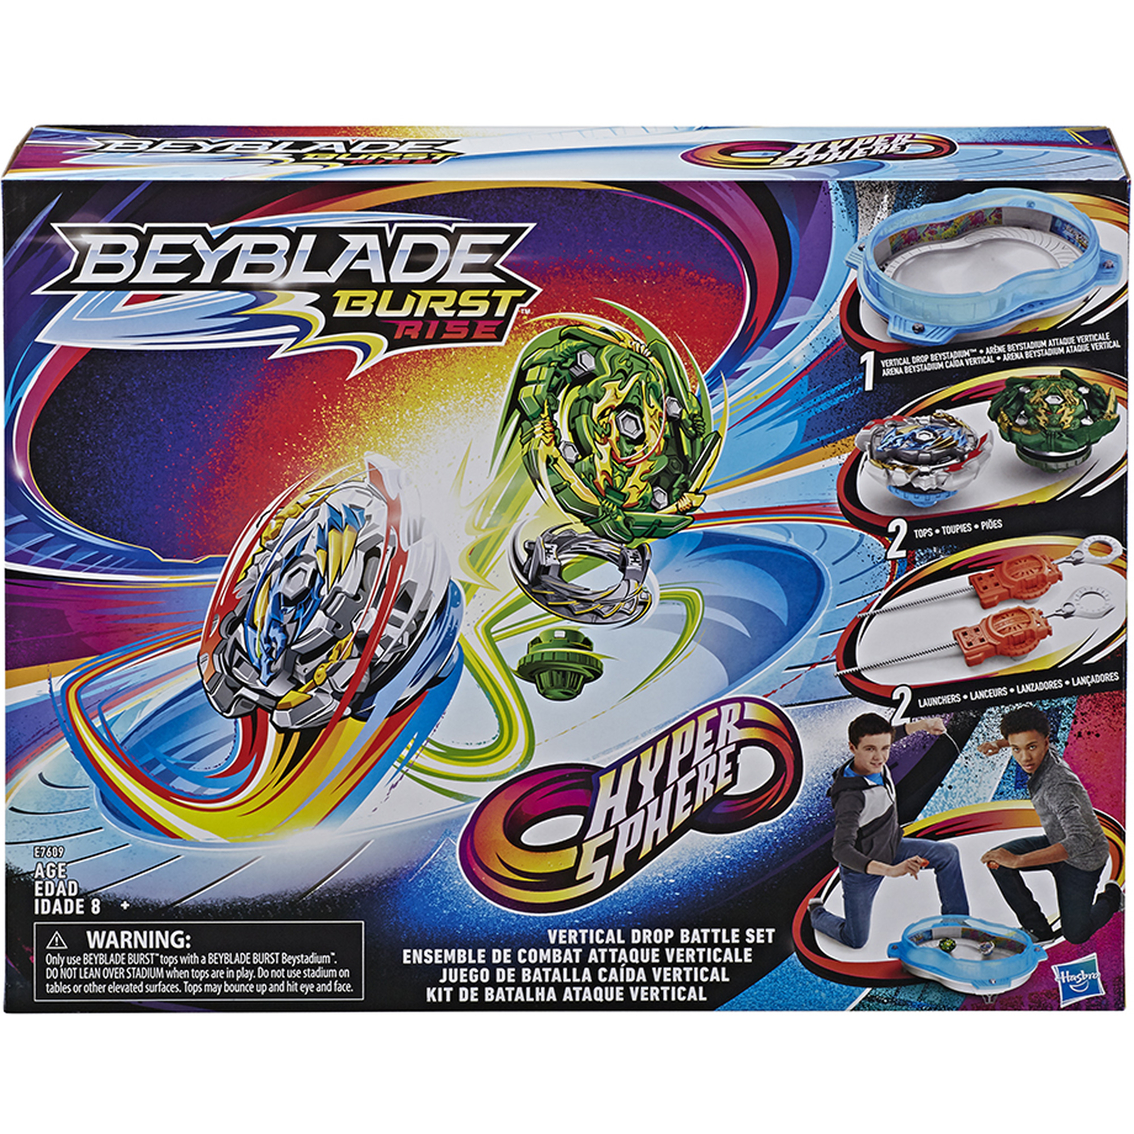 search up beyblades